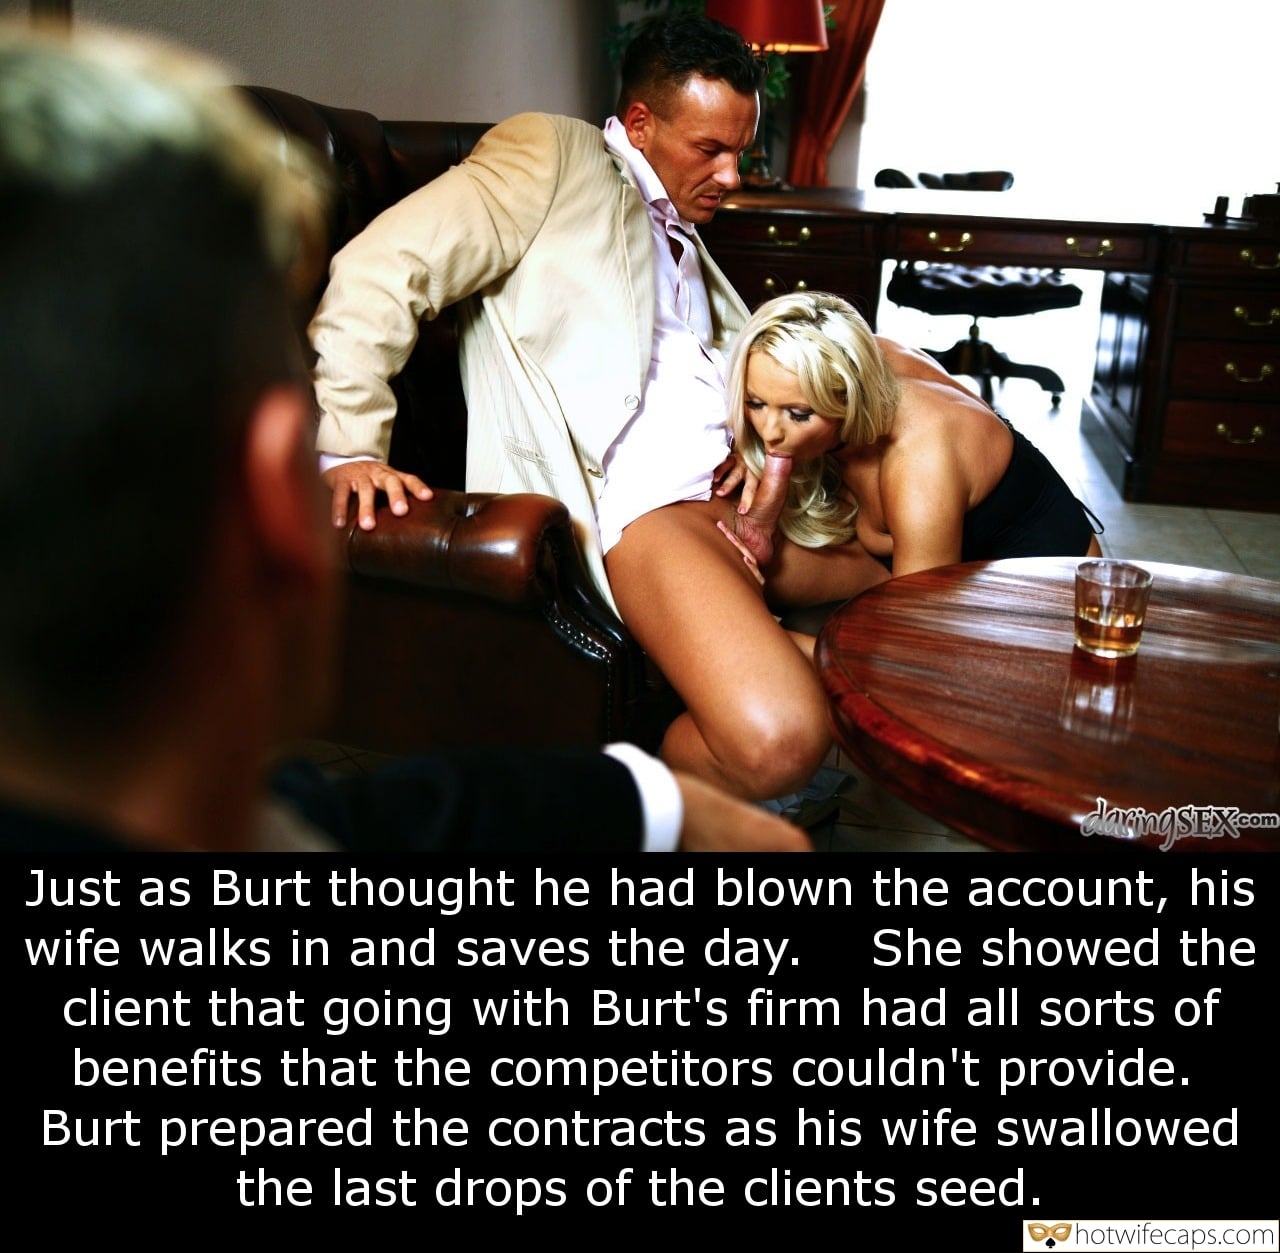 Blowjob hotwife caption: Just as Burt thought he had blown the account, his wife walks in and saves the day. client that going with Burt’s firm had all sorts of benefits that the competitors couldn’t provide. Burt prepared the contracts as his wife...